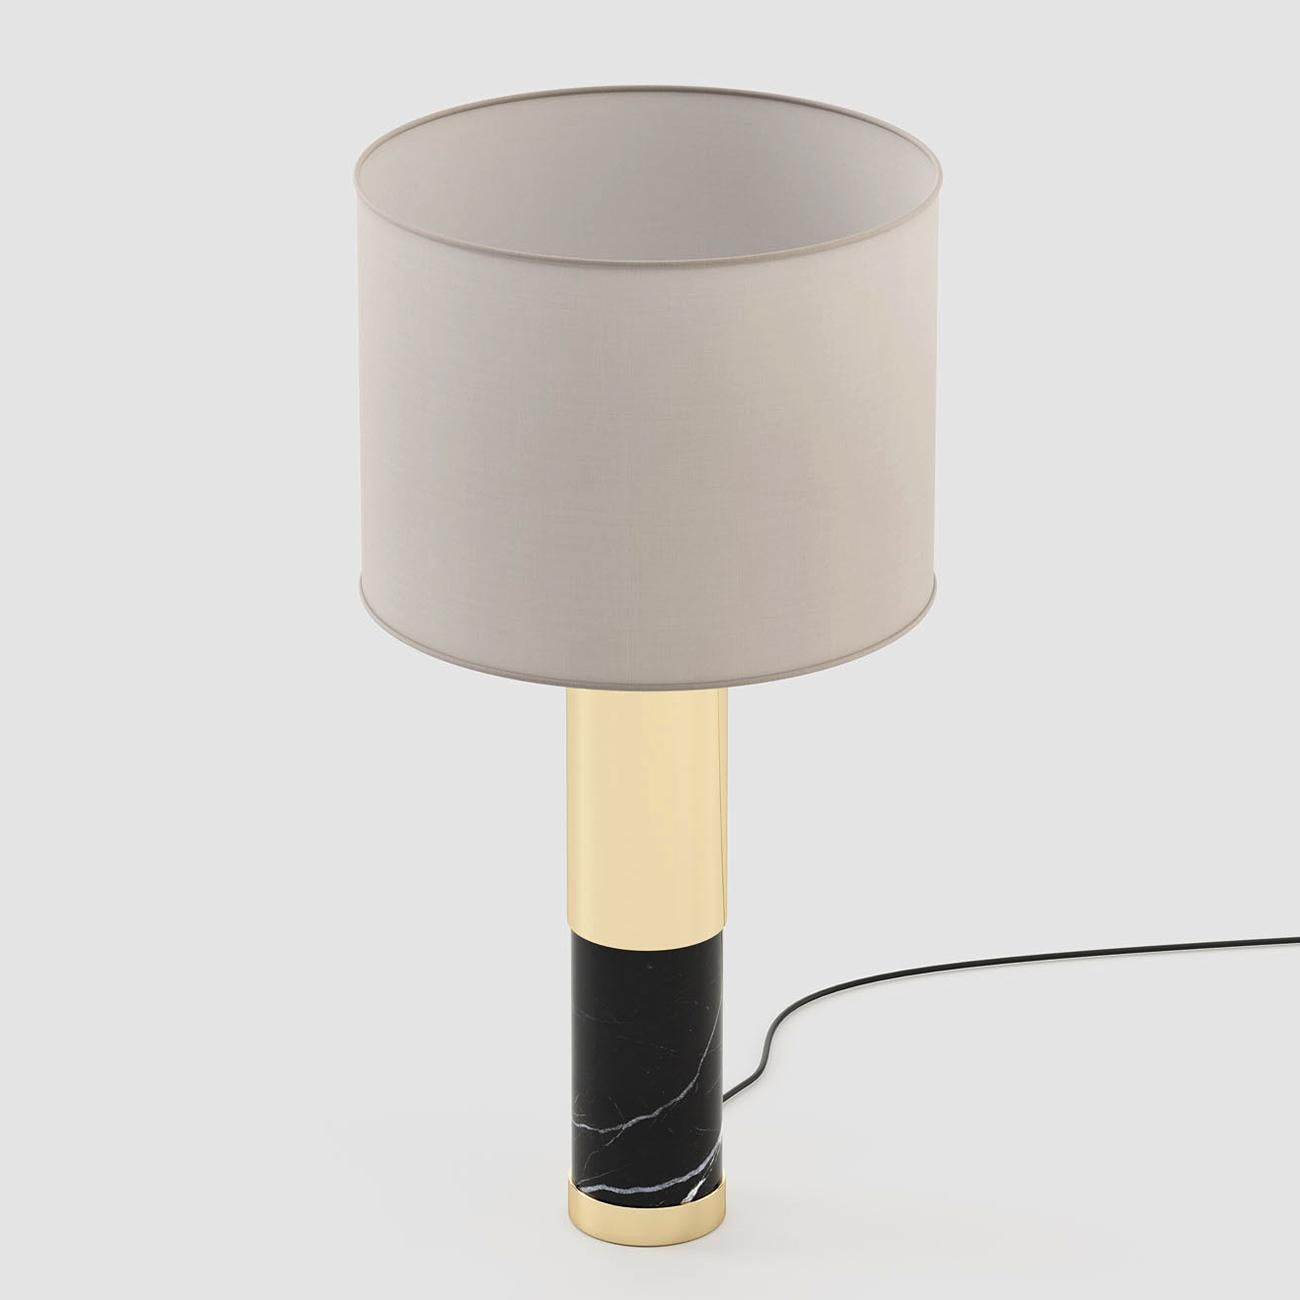 Table lamp paula with polished stainless steel
base in gold finish and with black marble base,
Including a white coton shade. 1 bulb, lamp holder 
type E27, max 40 Watt. Bulb not included.